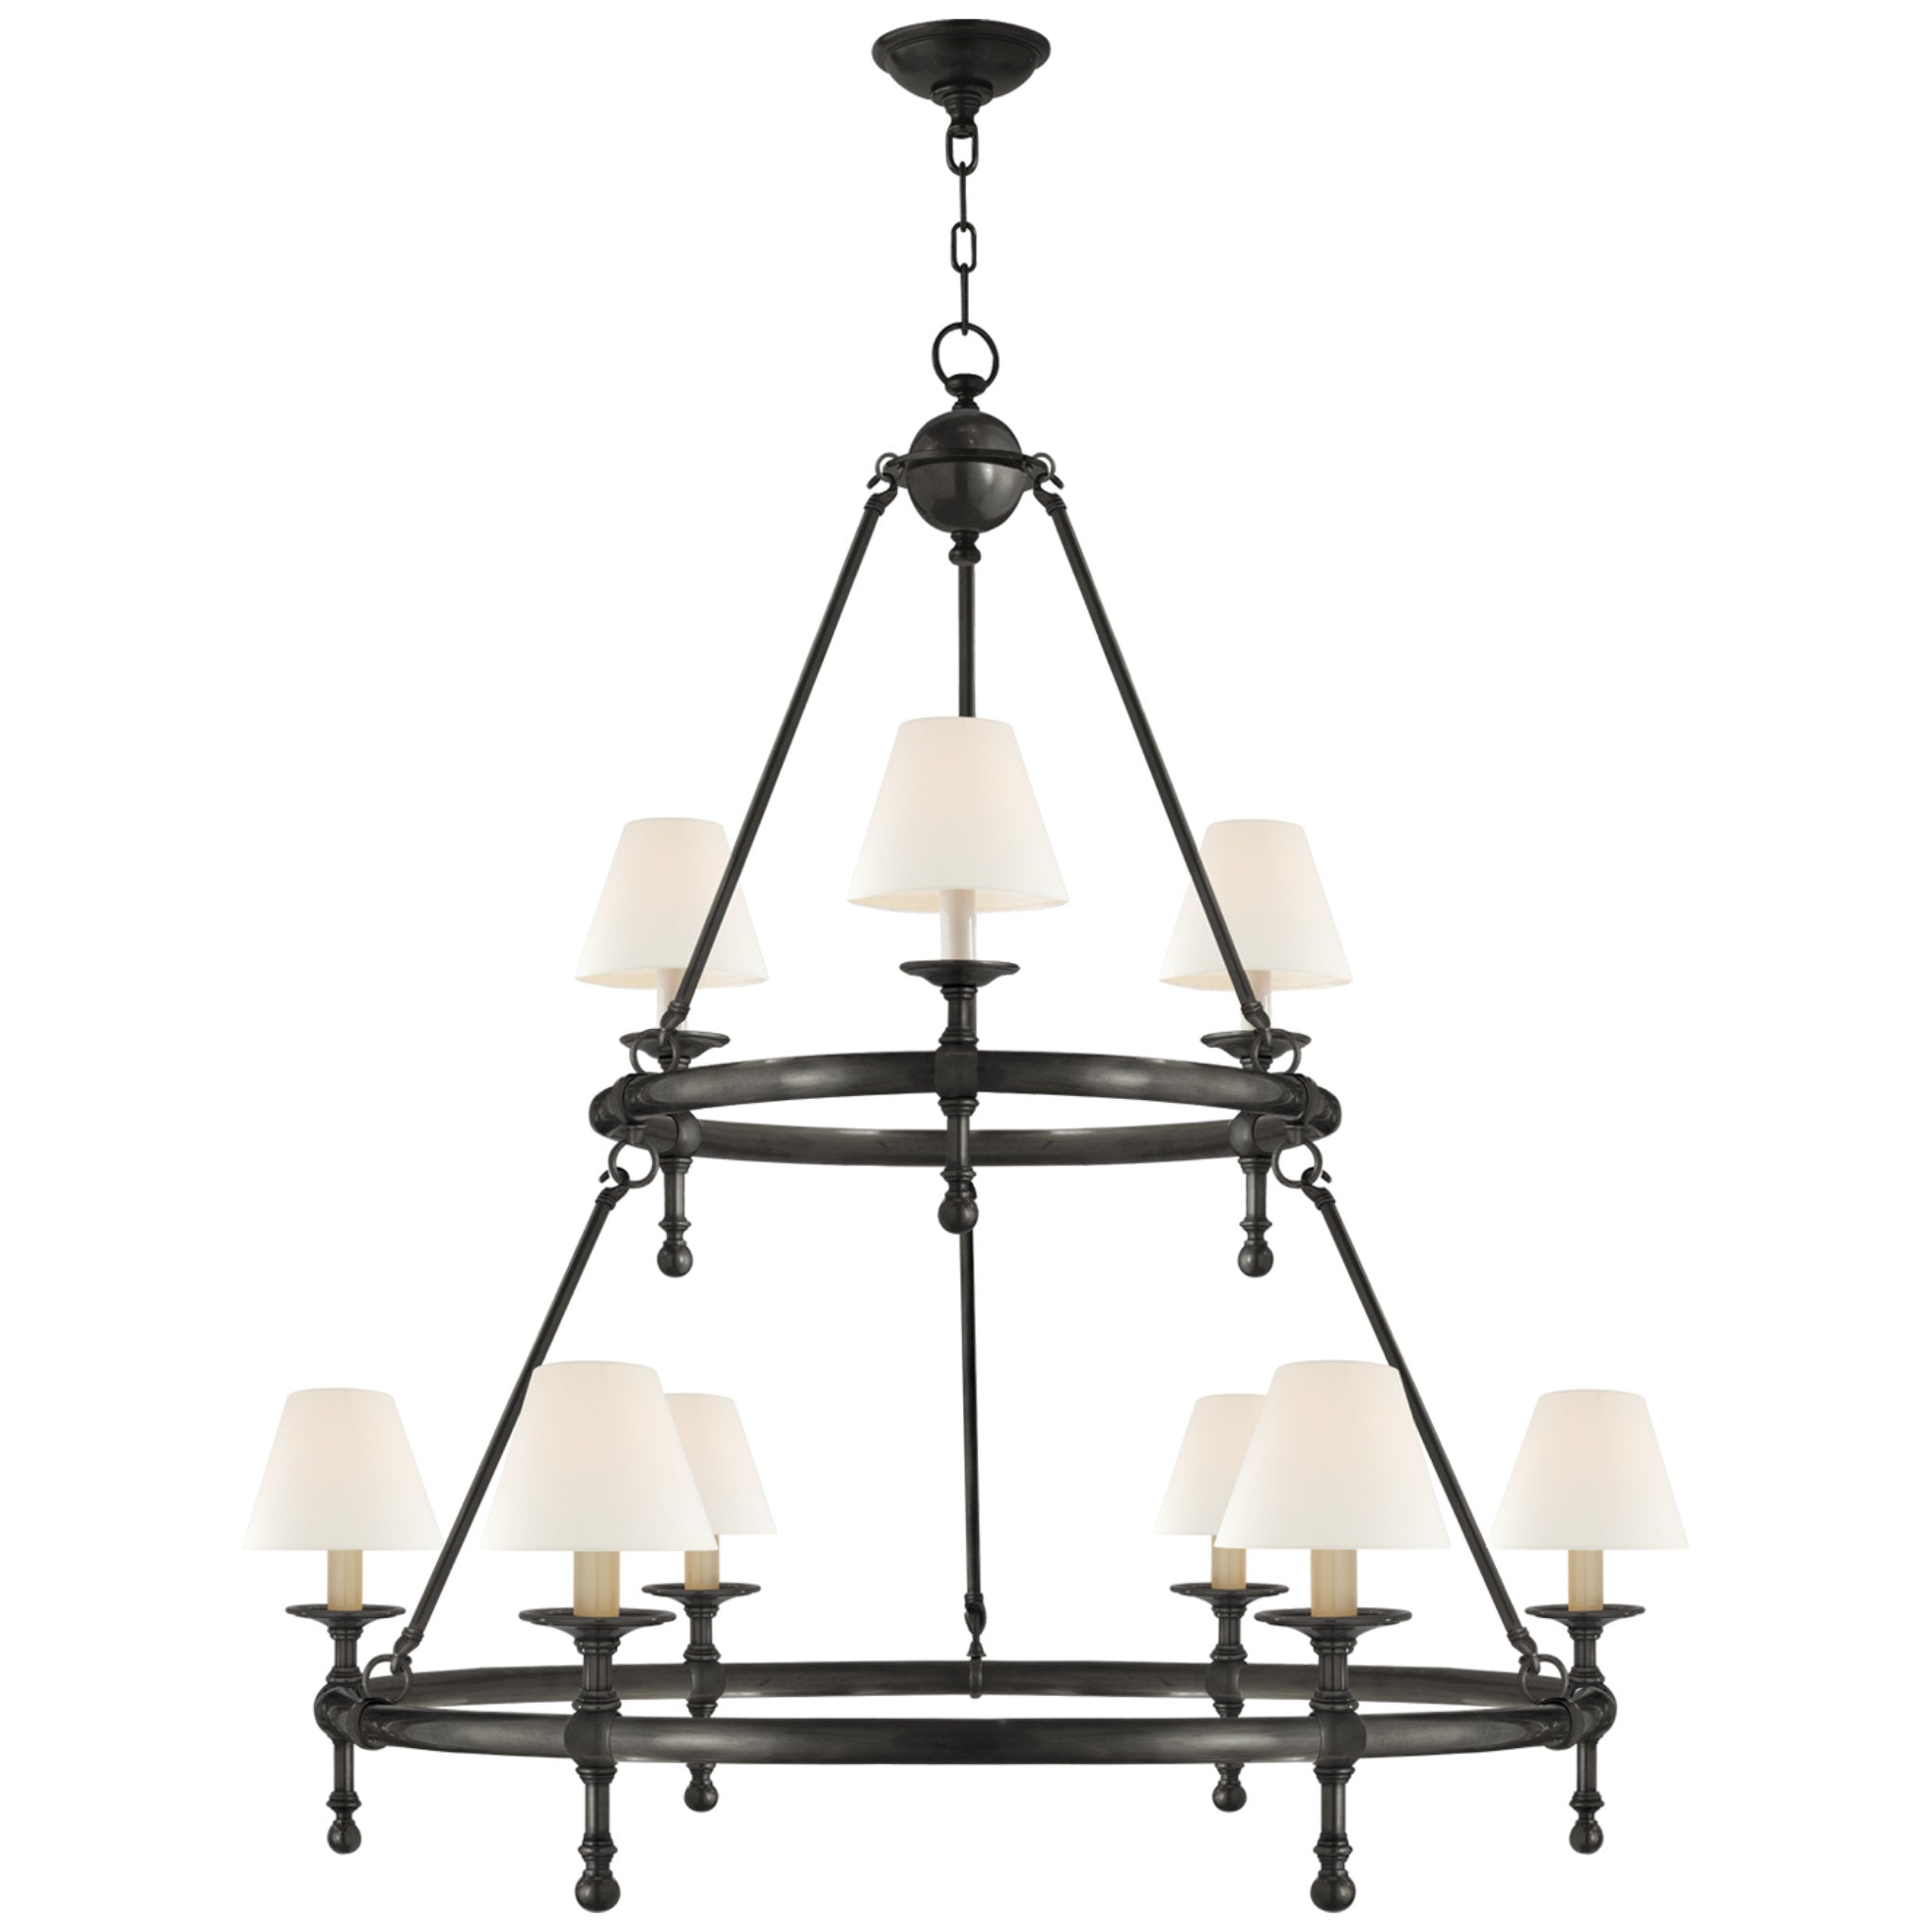 Chapman & Myers Classic Two-Tier Ring Chandelier in Bronze with Linen Shades